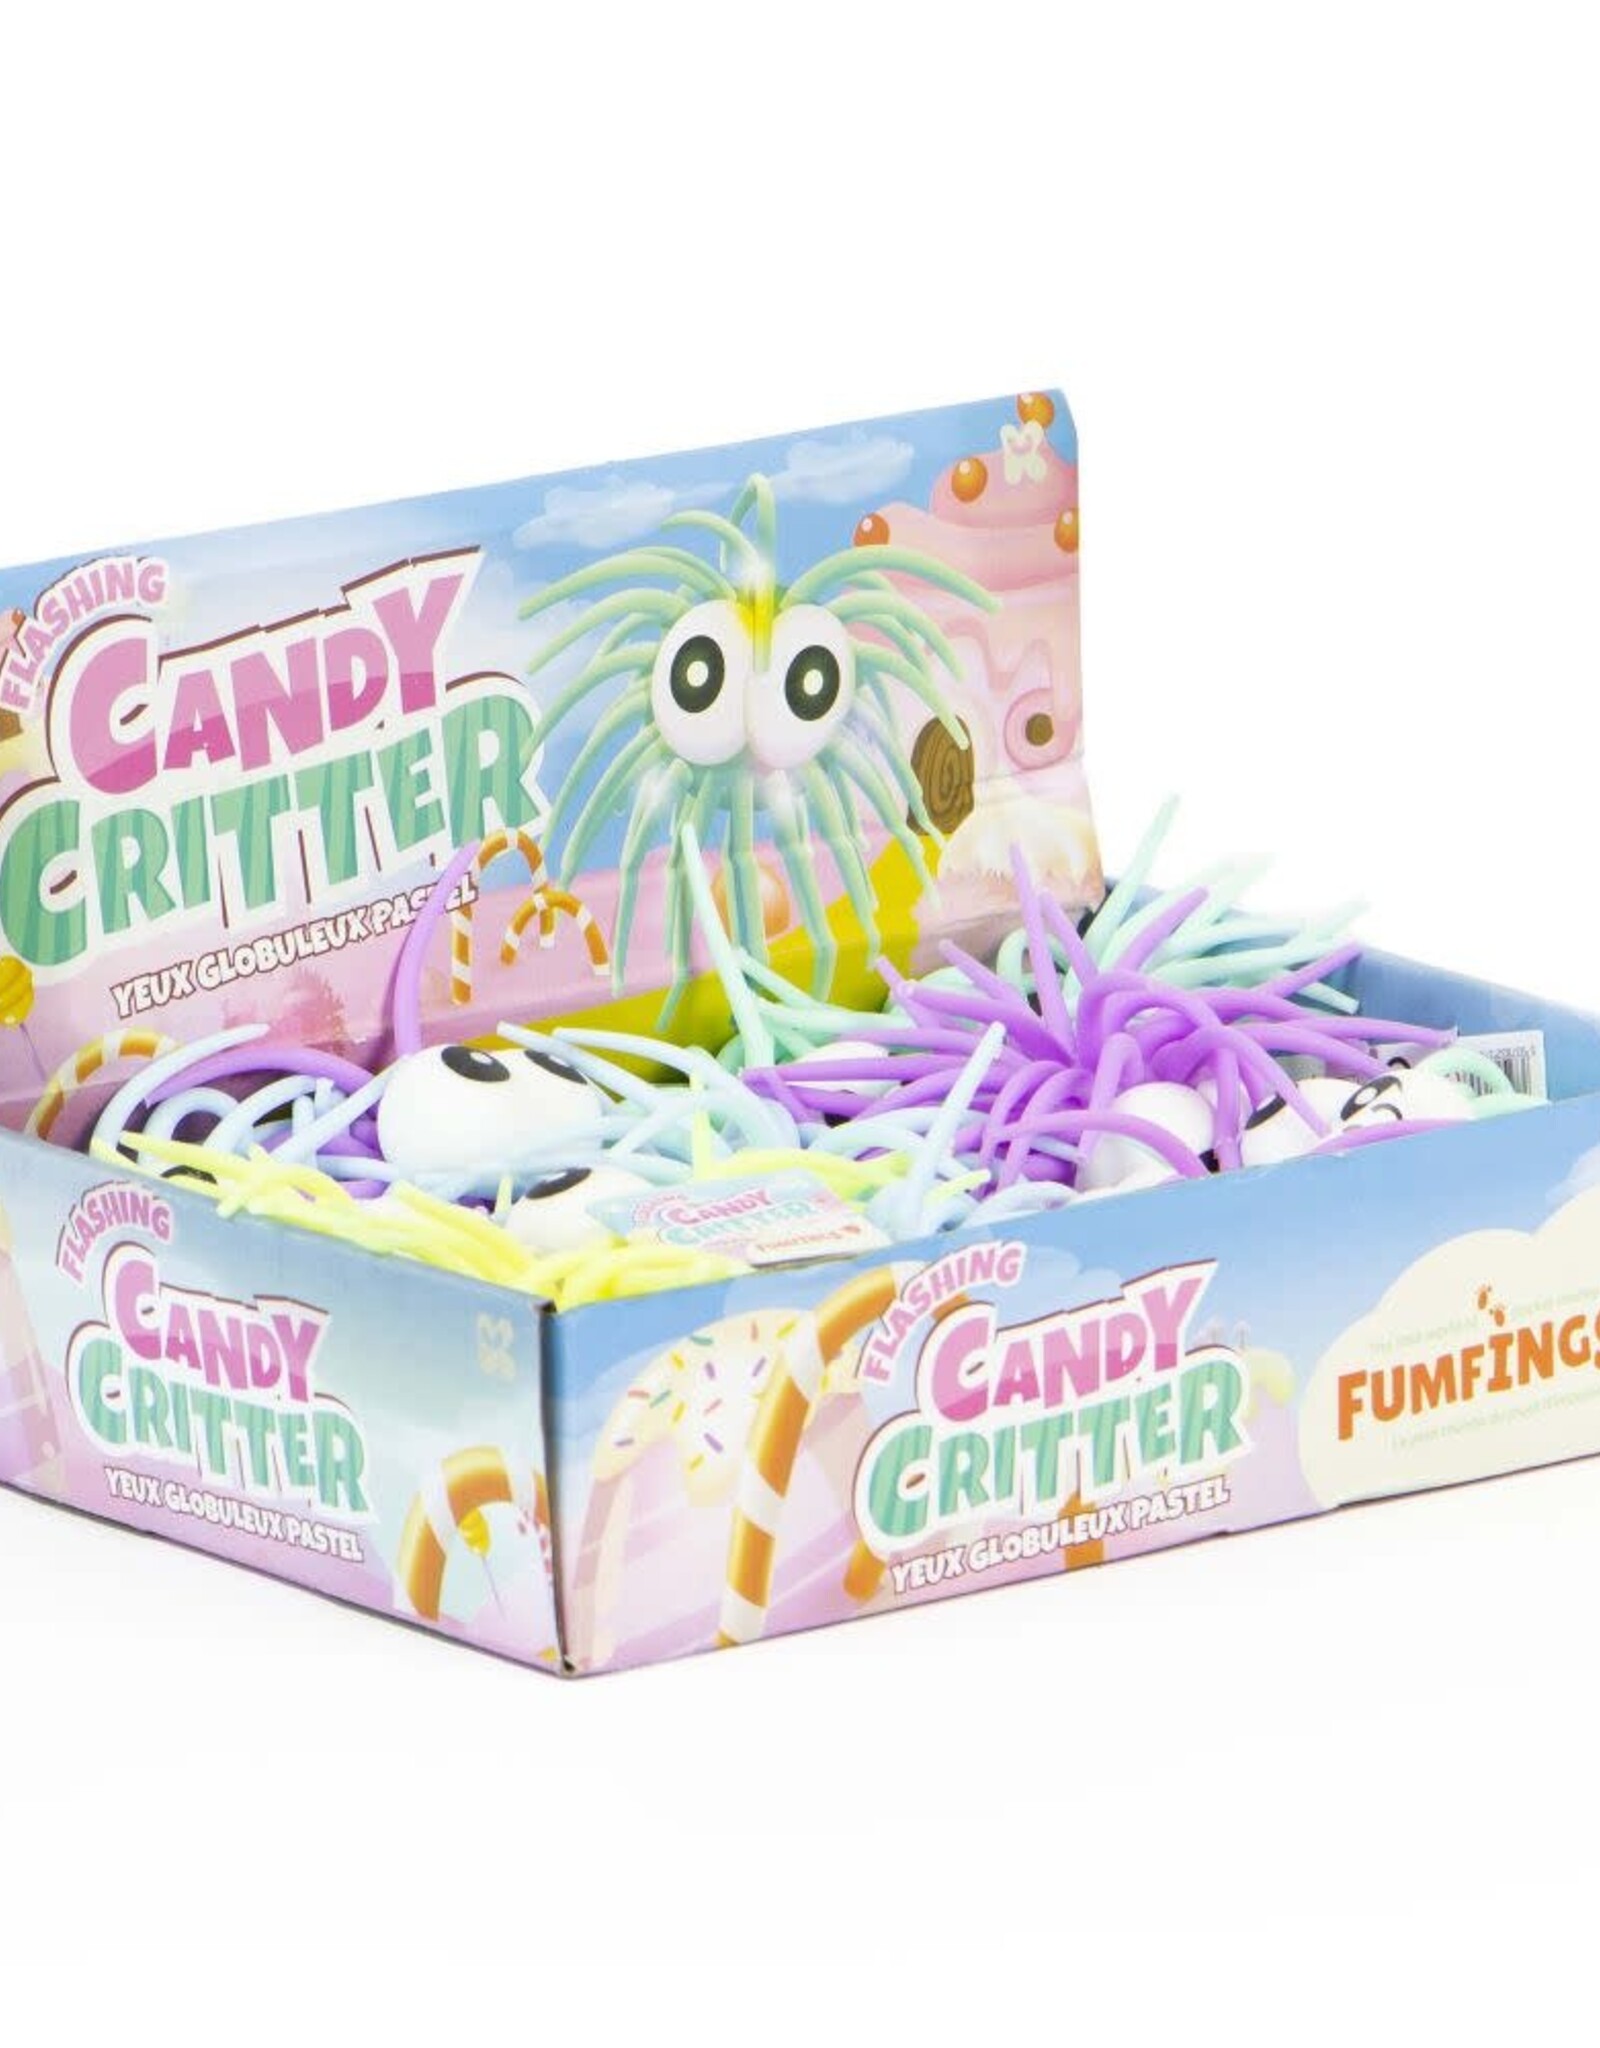 ## Flashing Candy Critters